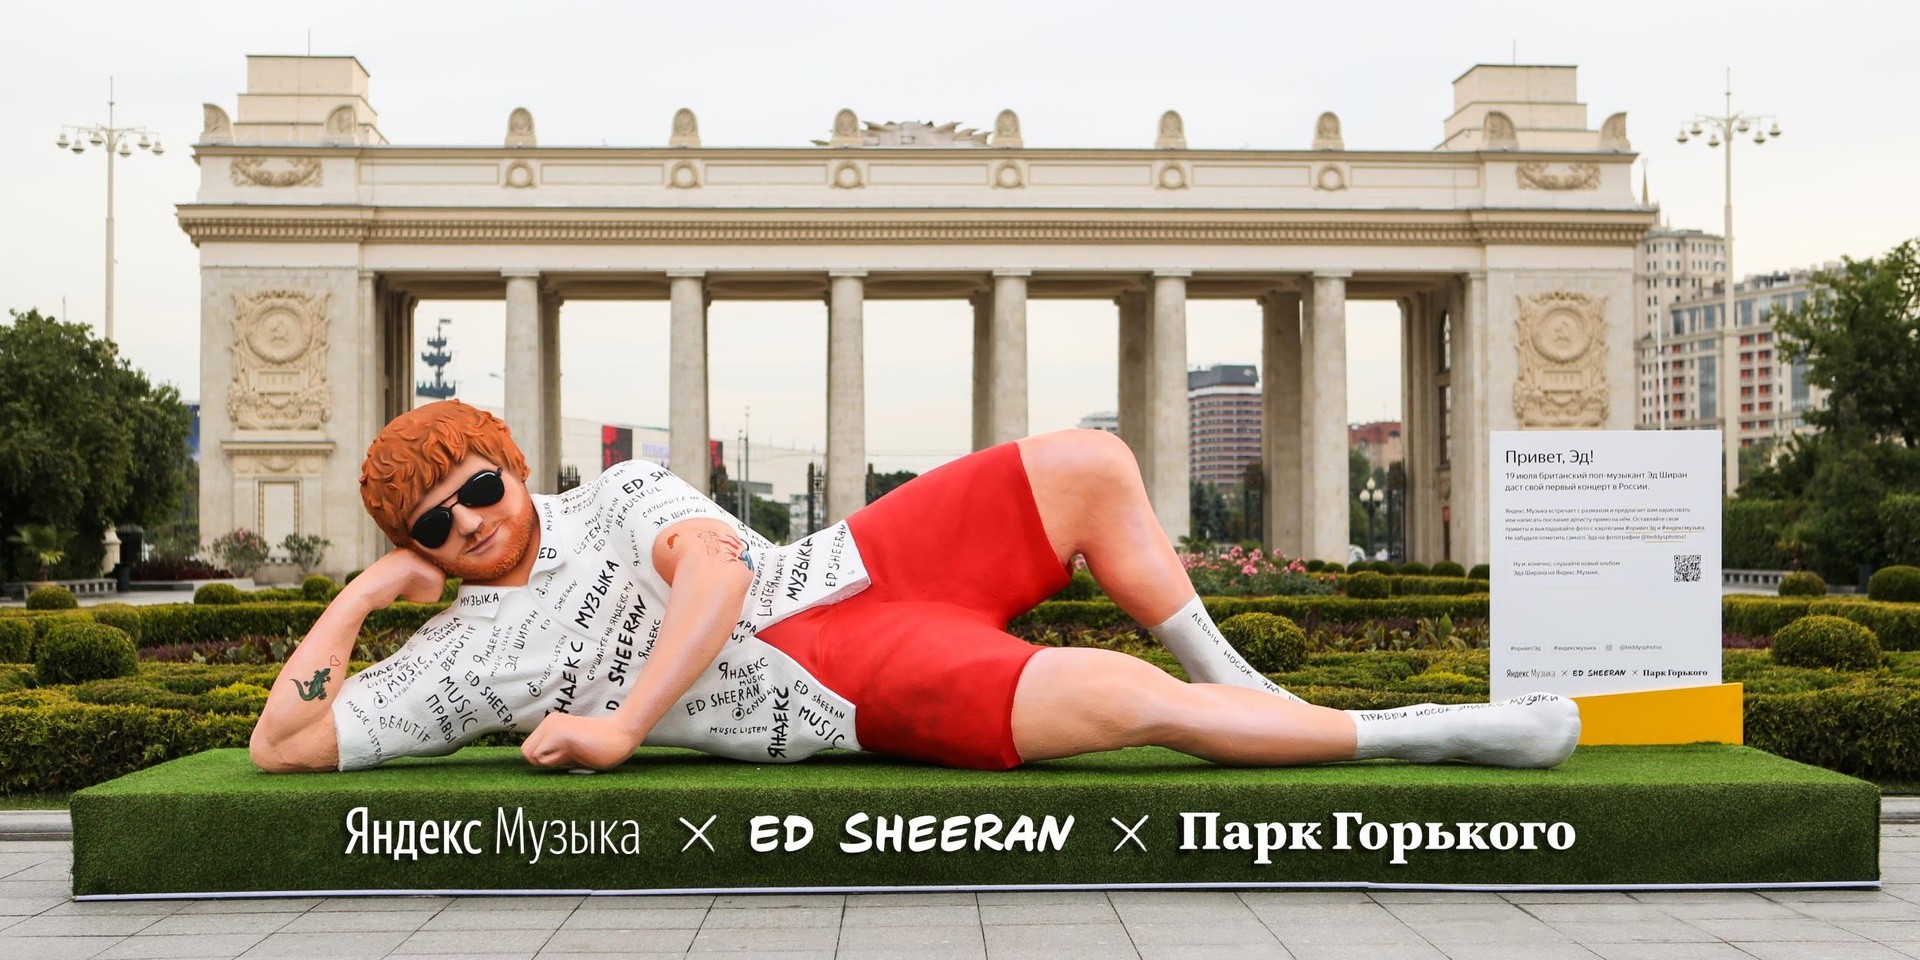 A giant Ed Sheeran statue has appeared in Moscow ahead of Russian concert